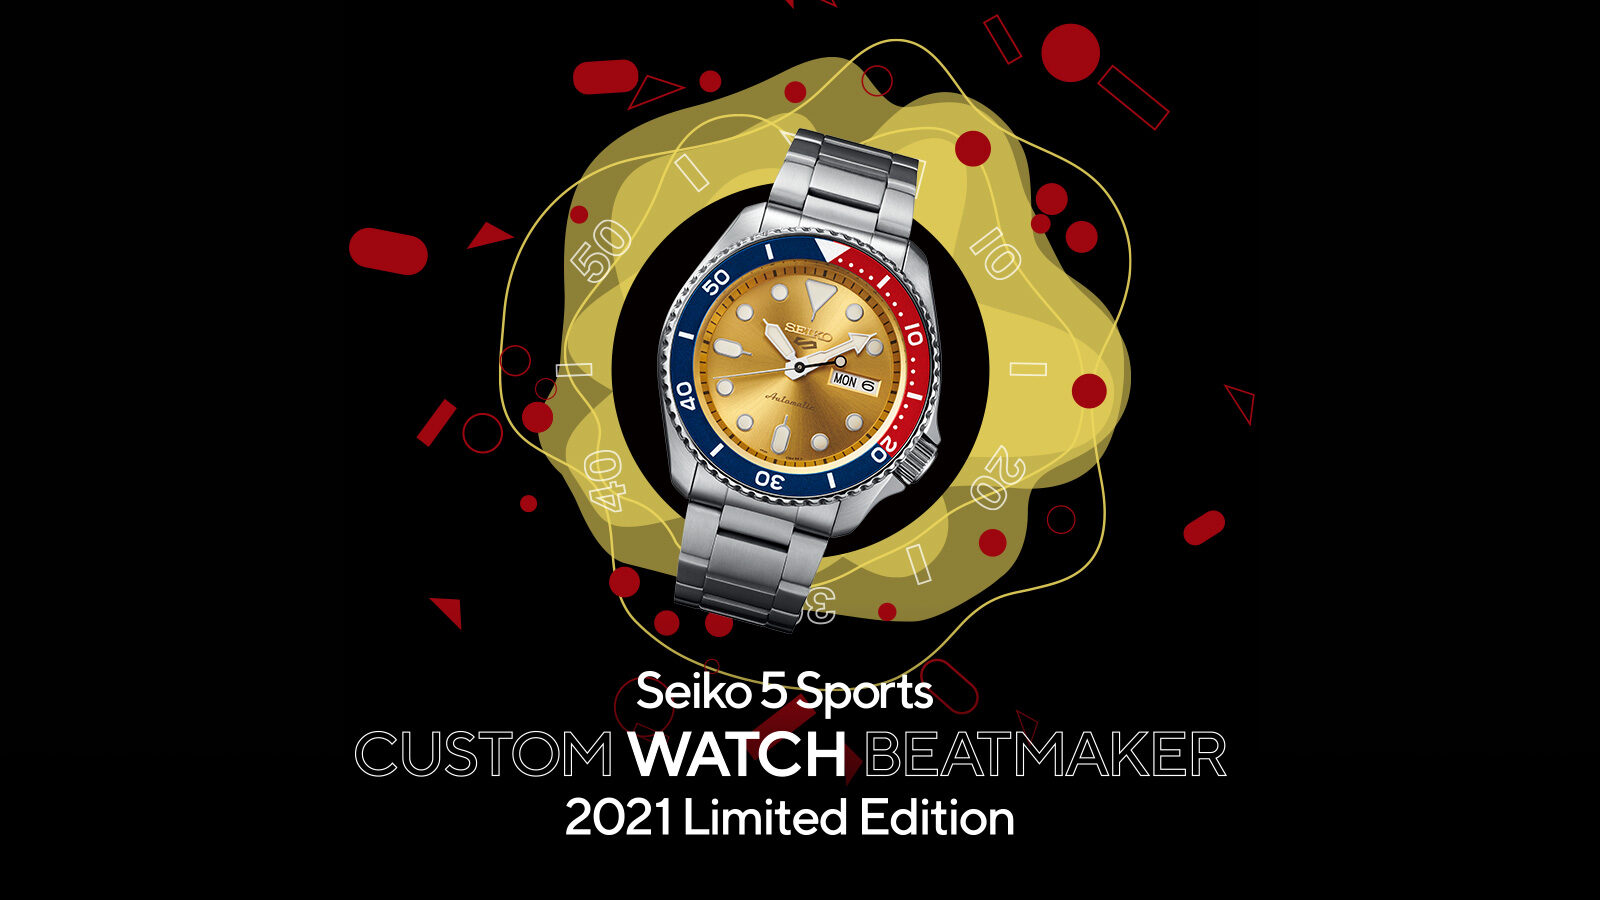 The winning watch from the CUSTOM WATCH BEATMAKER campaign joins the Seiko  5 Sports collection | Tilia Speculum